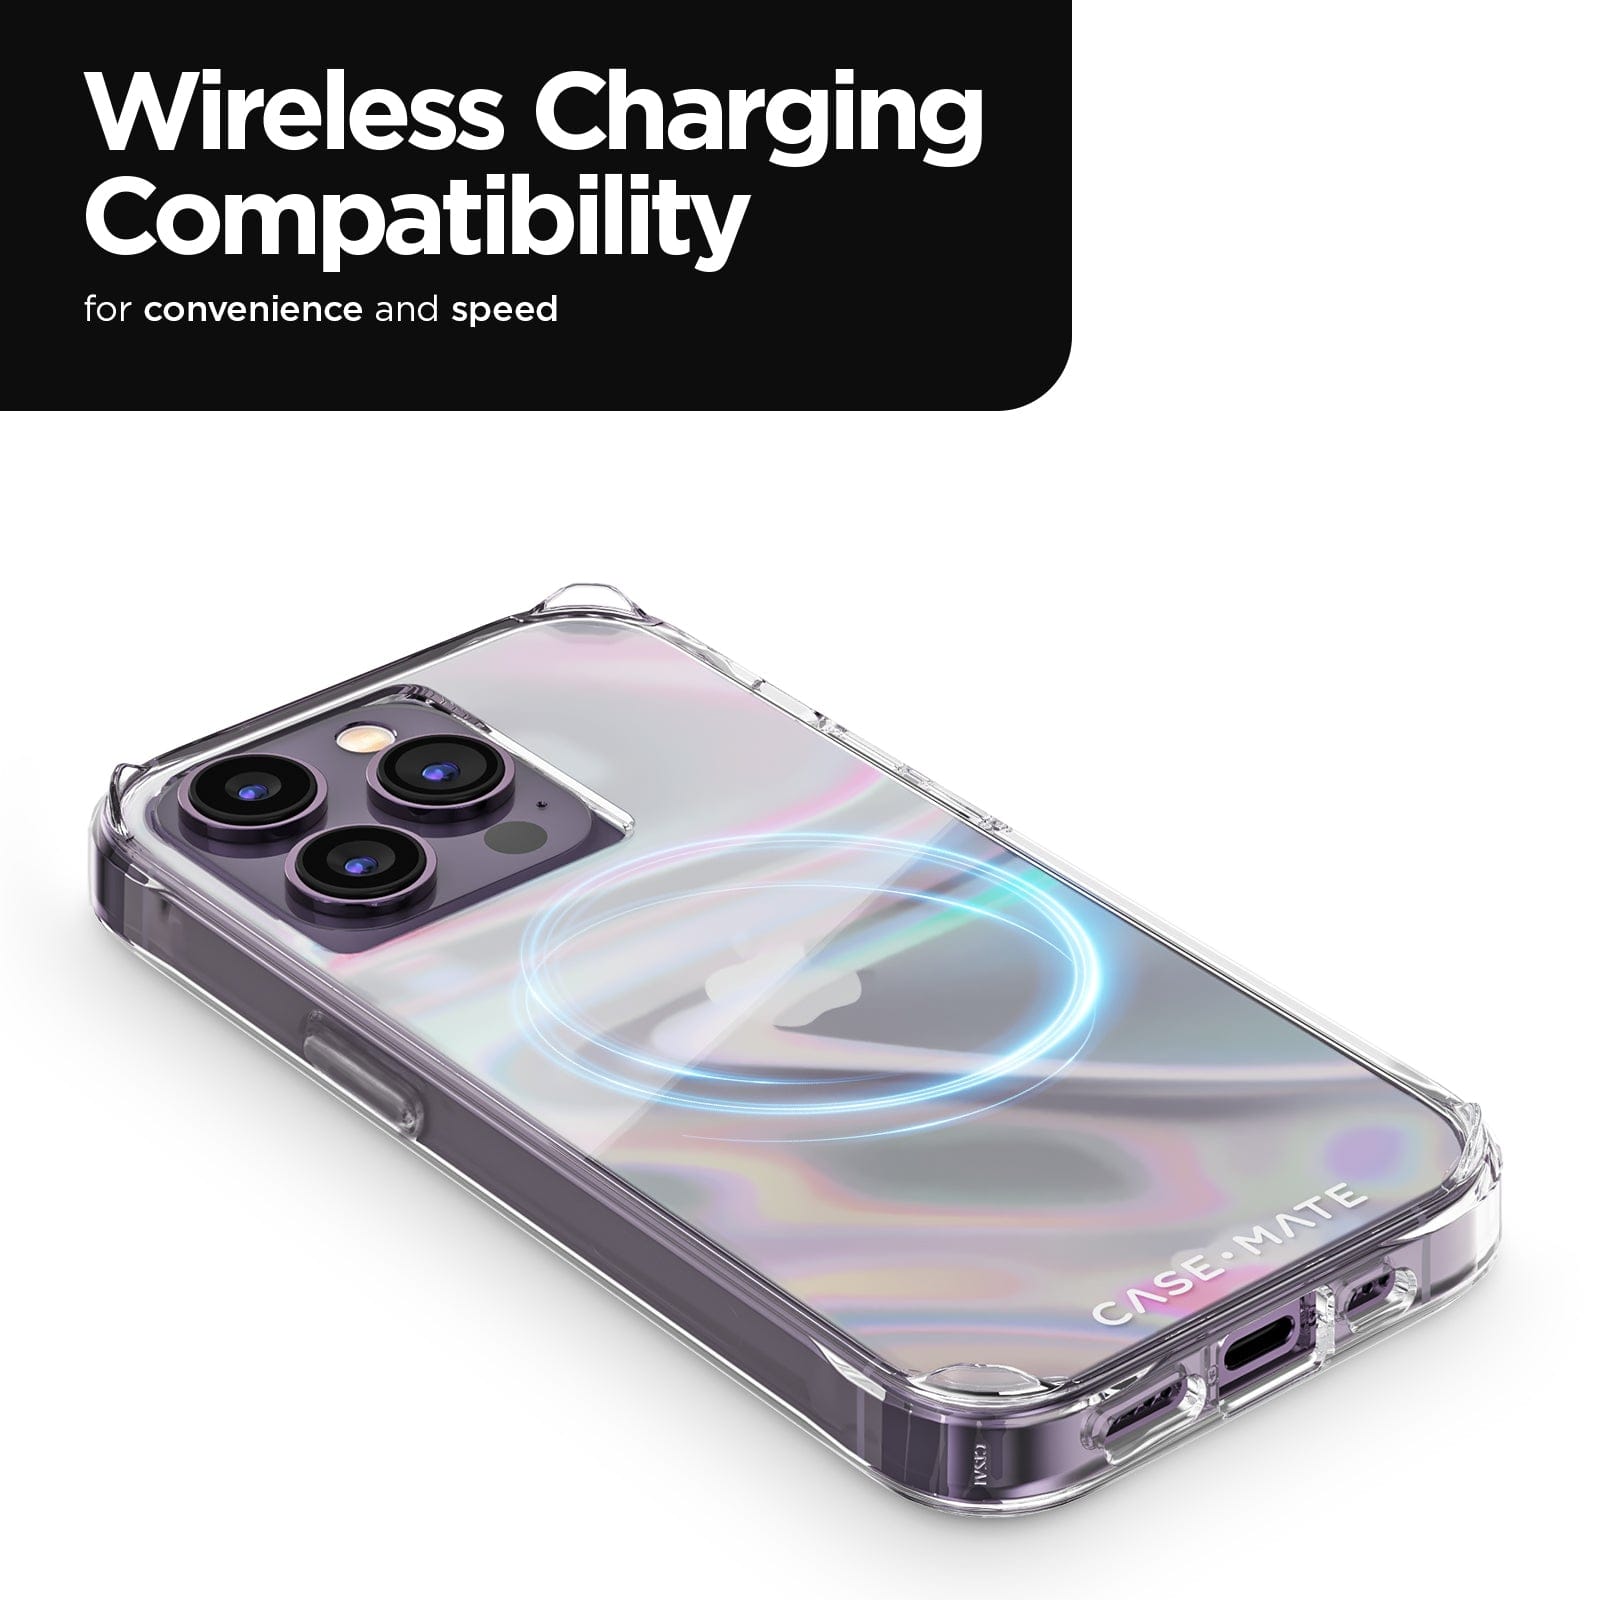 WIRELESS CHARGING COMPATIBILITY FOR CONVENIENCE AND SPEED.